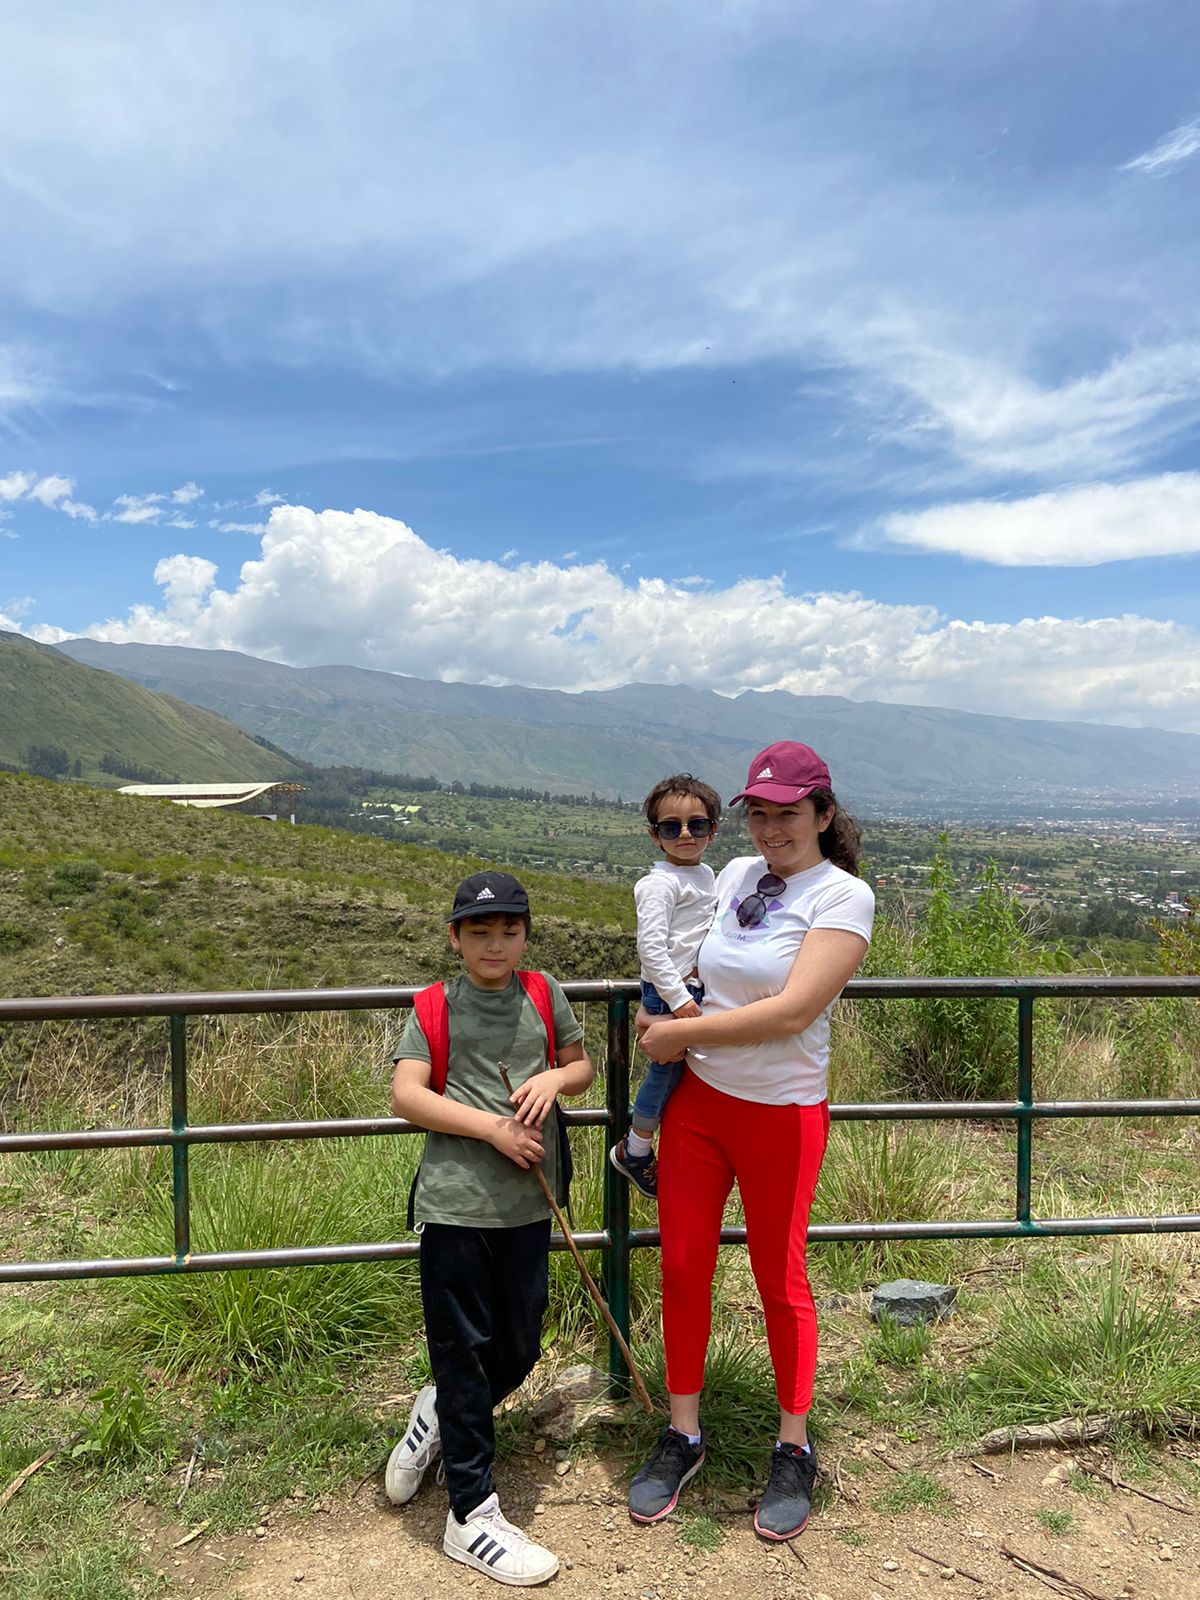 Ms. Nogales and her sons visiting Bolivia